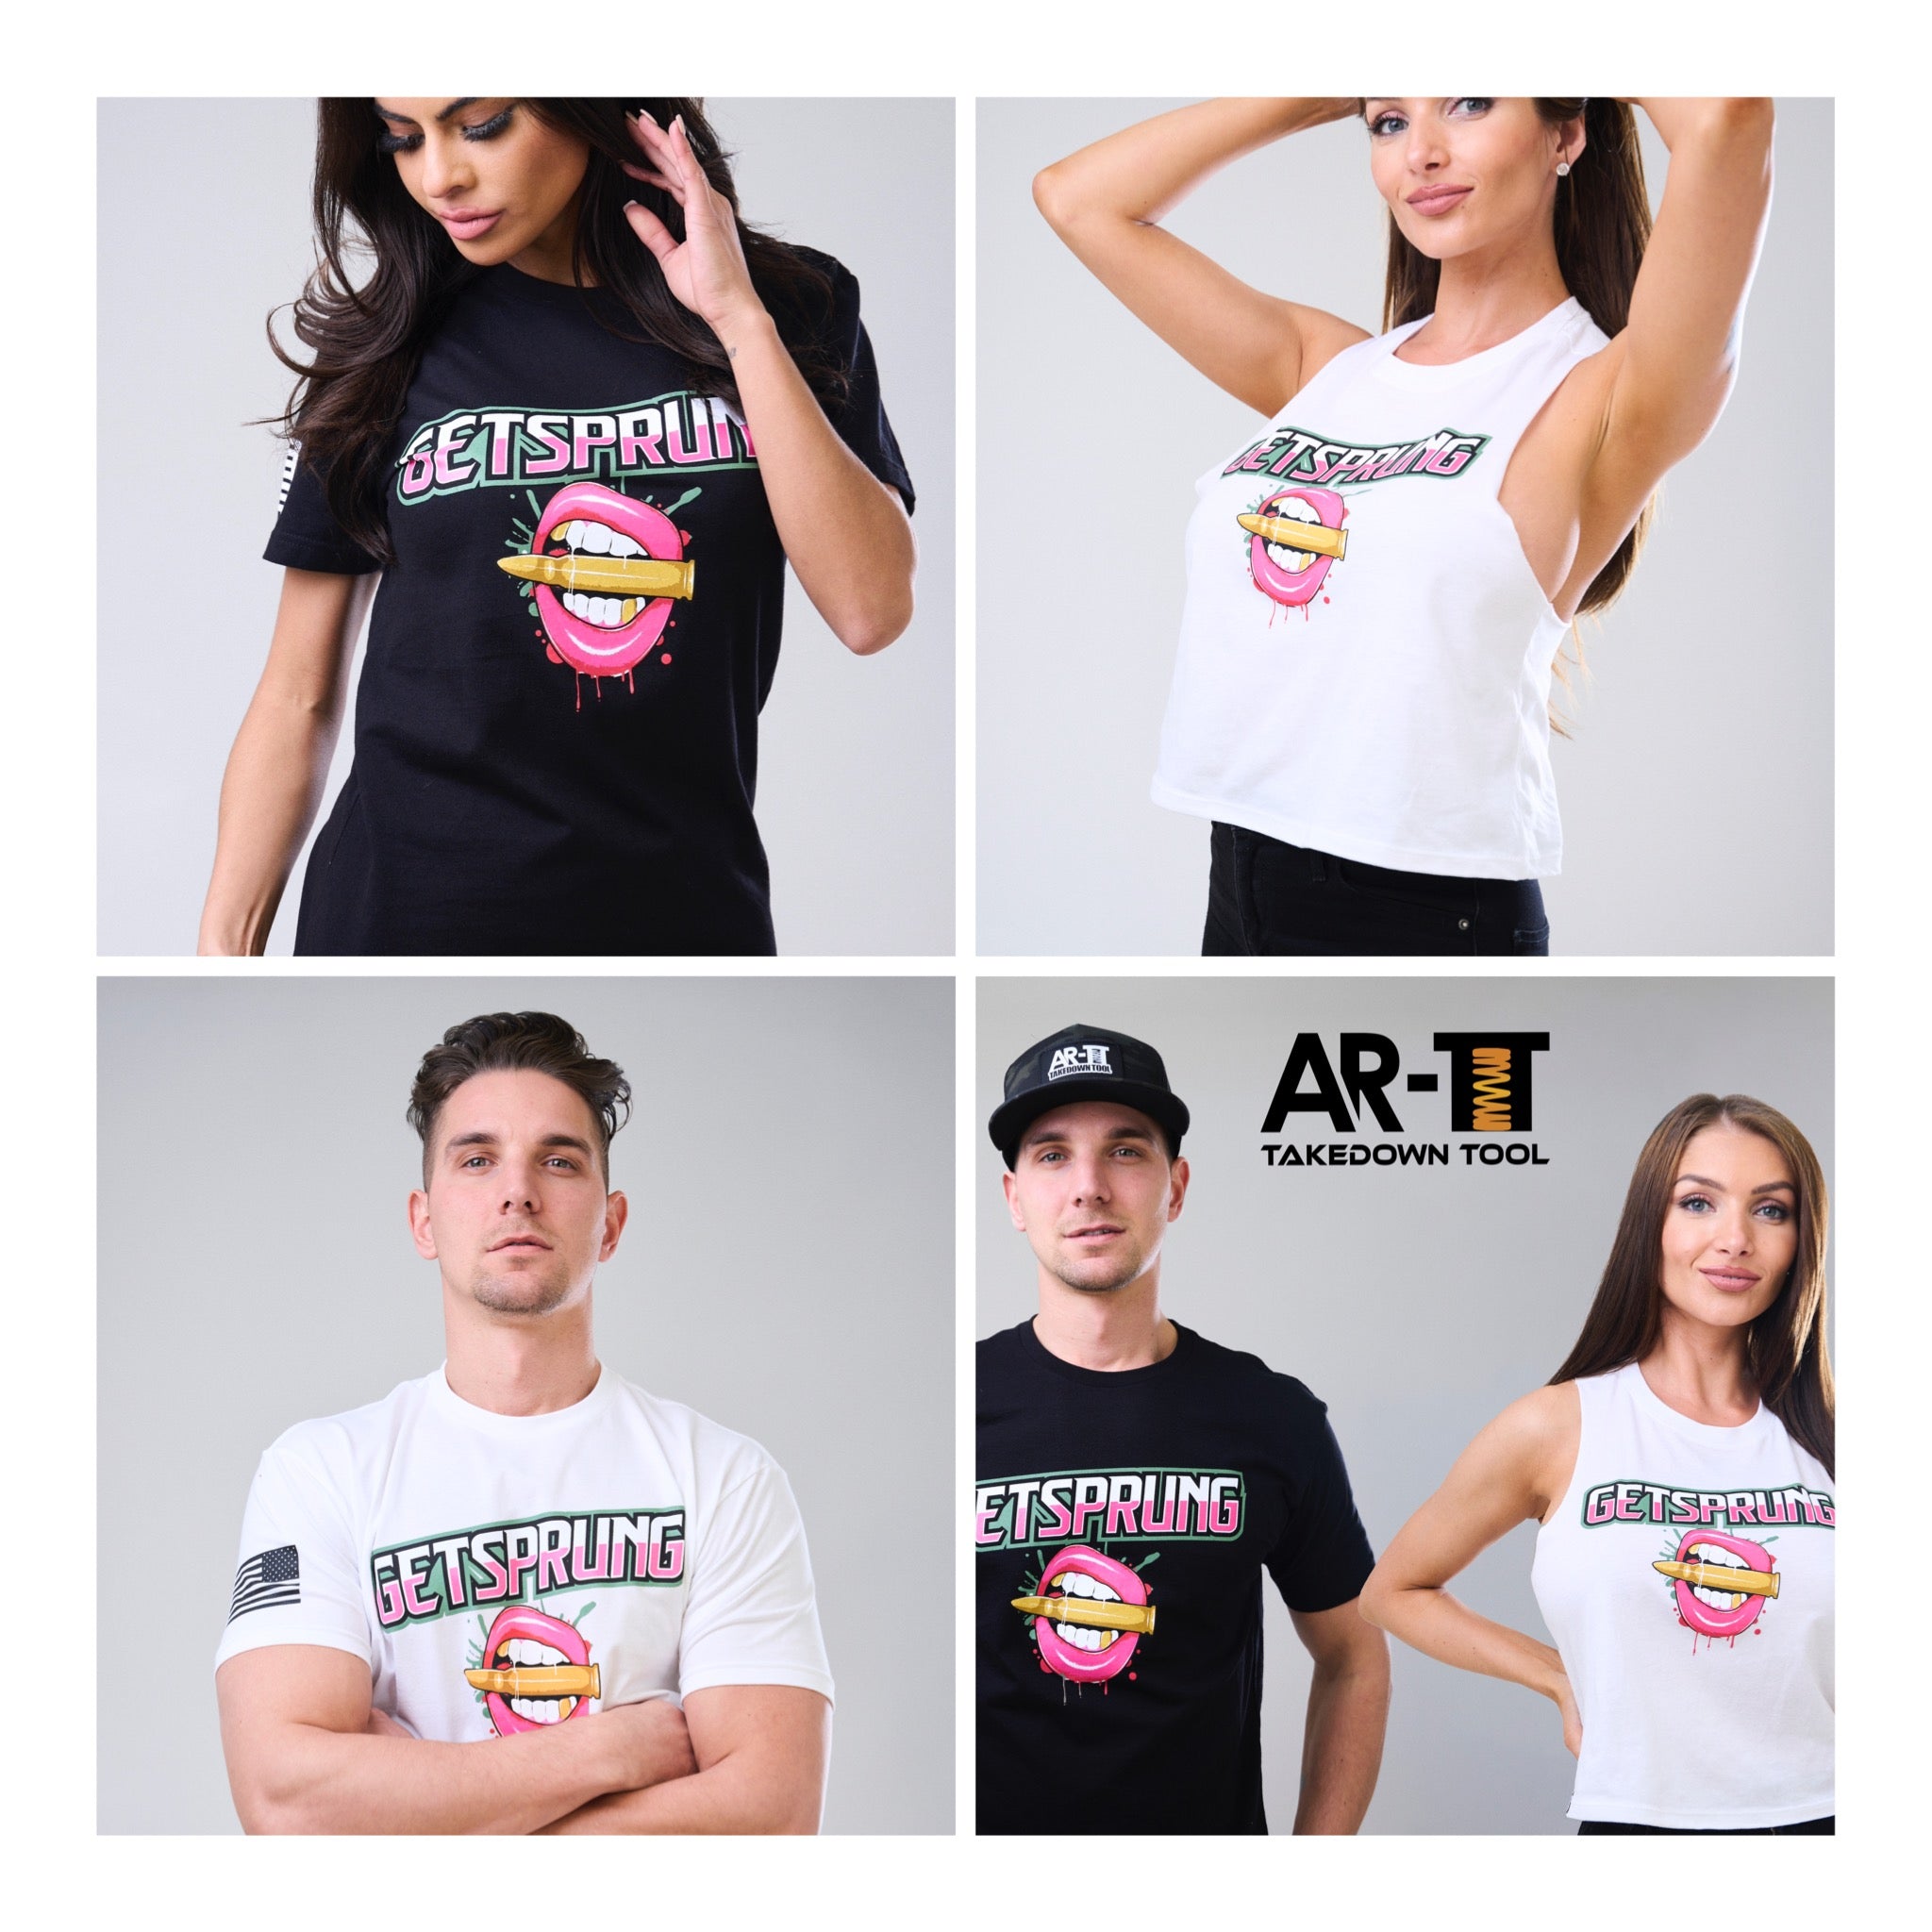 THE GET SPRUNG Apparel line is gaining traction all over the USA